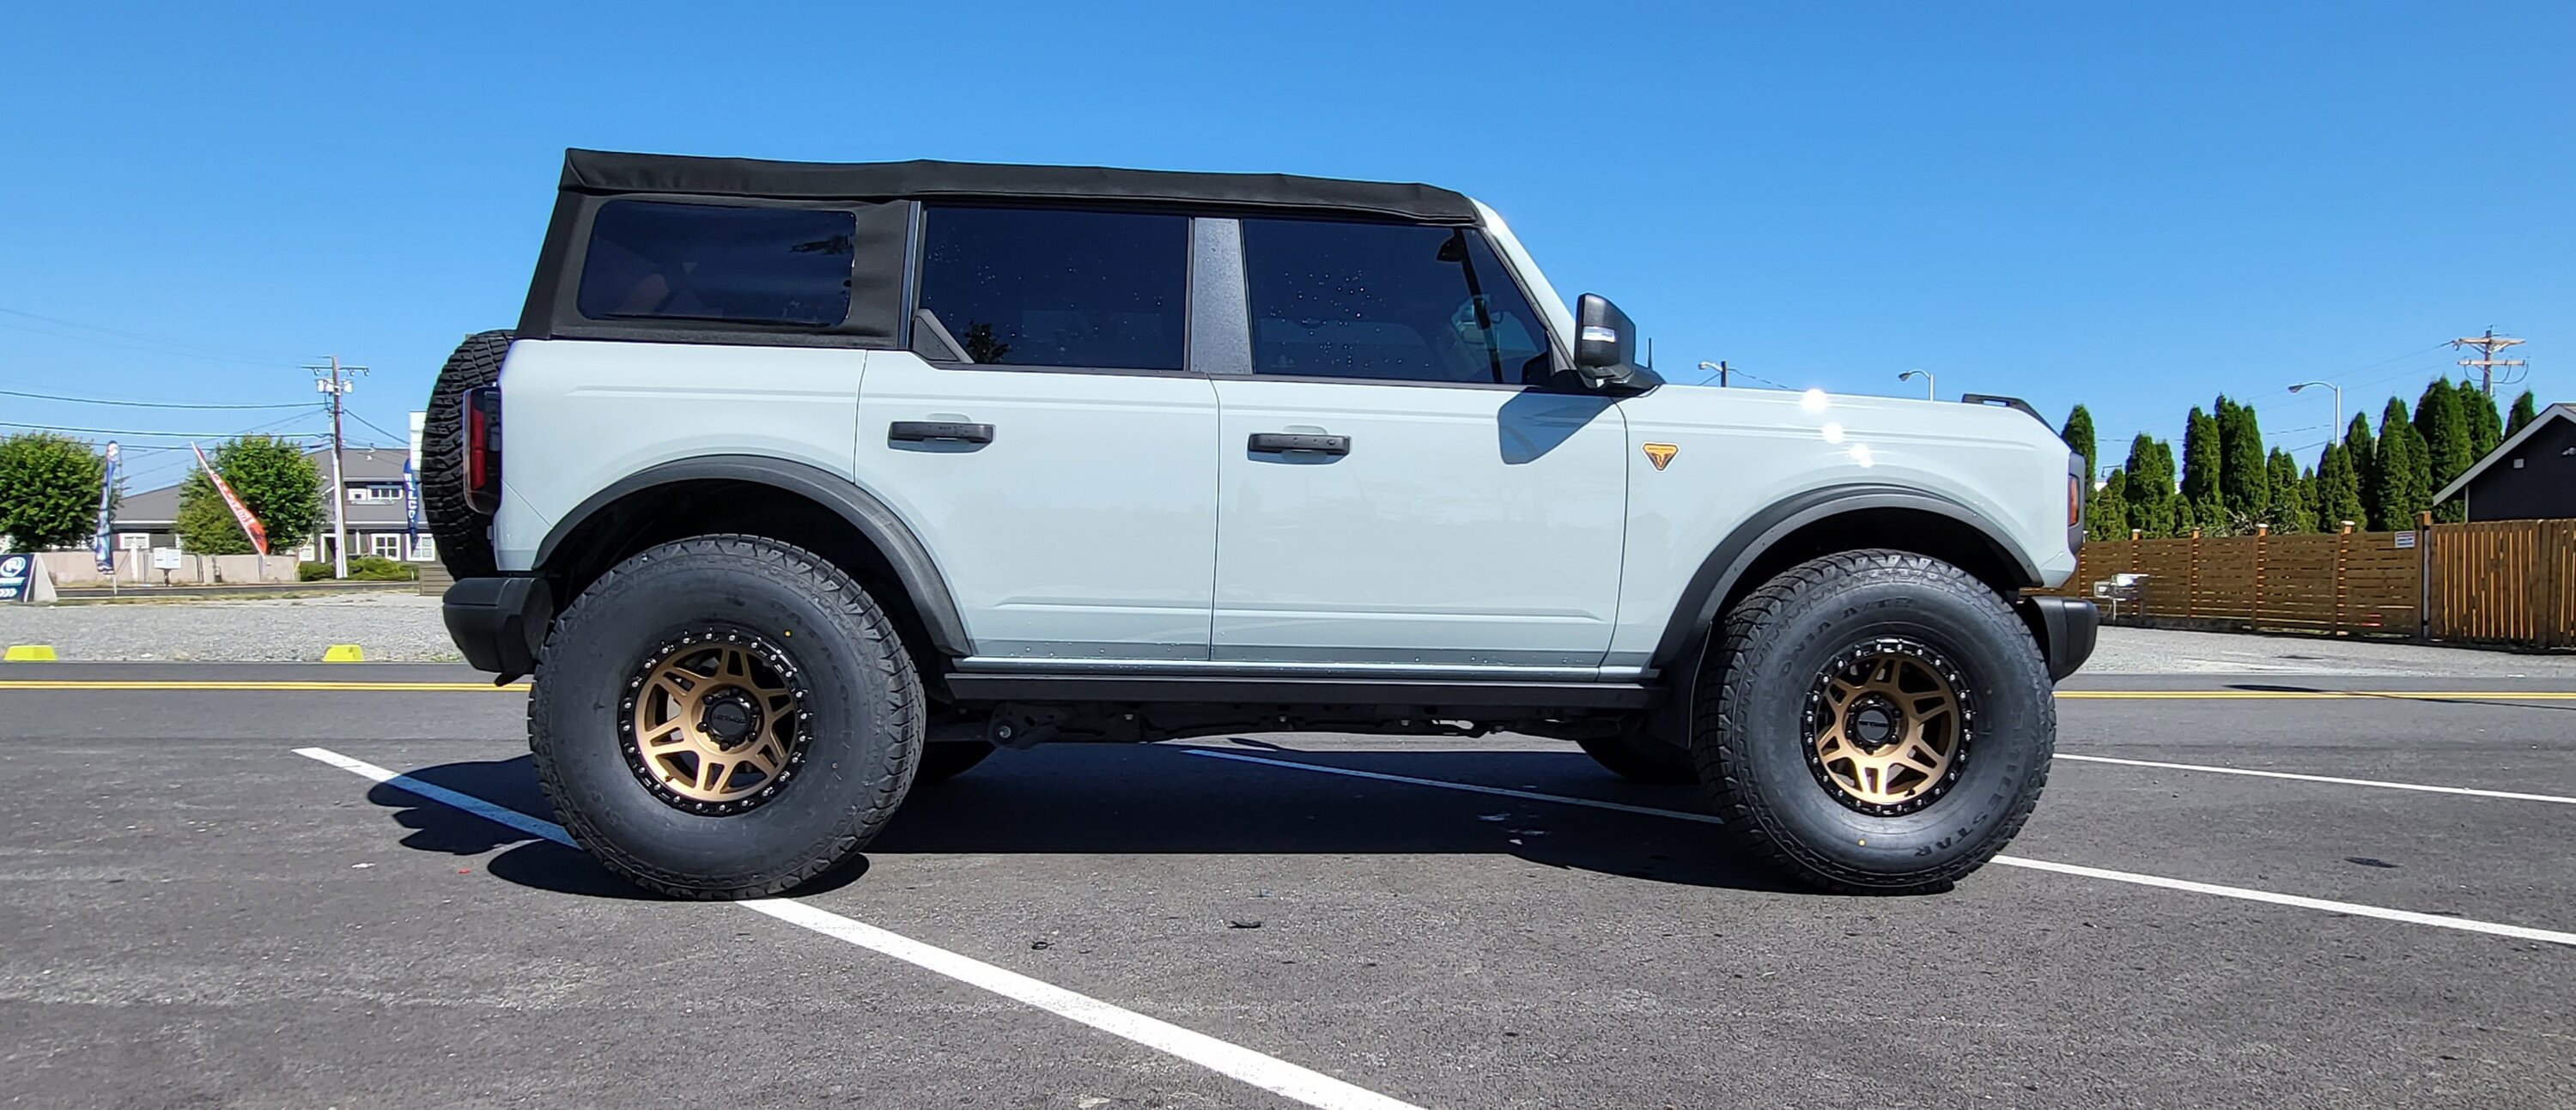 Ford Bronco Will 37s fit on Sasquatch for a direct drive to 4x4 shop to get lift installed? 20220817_153509